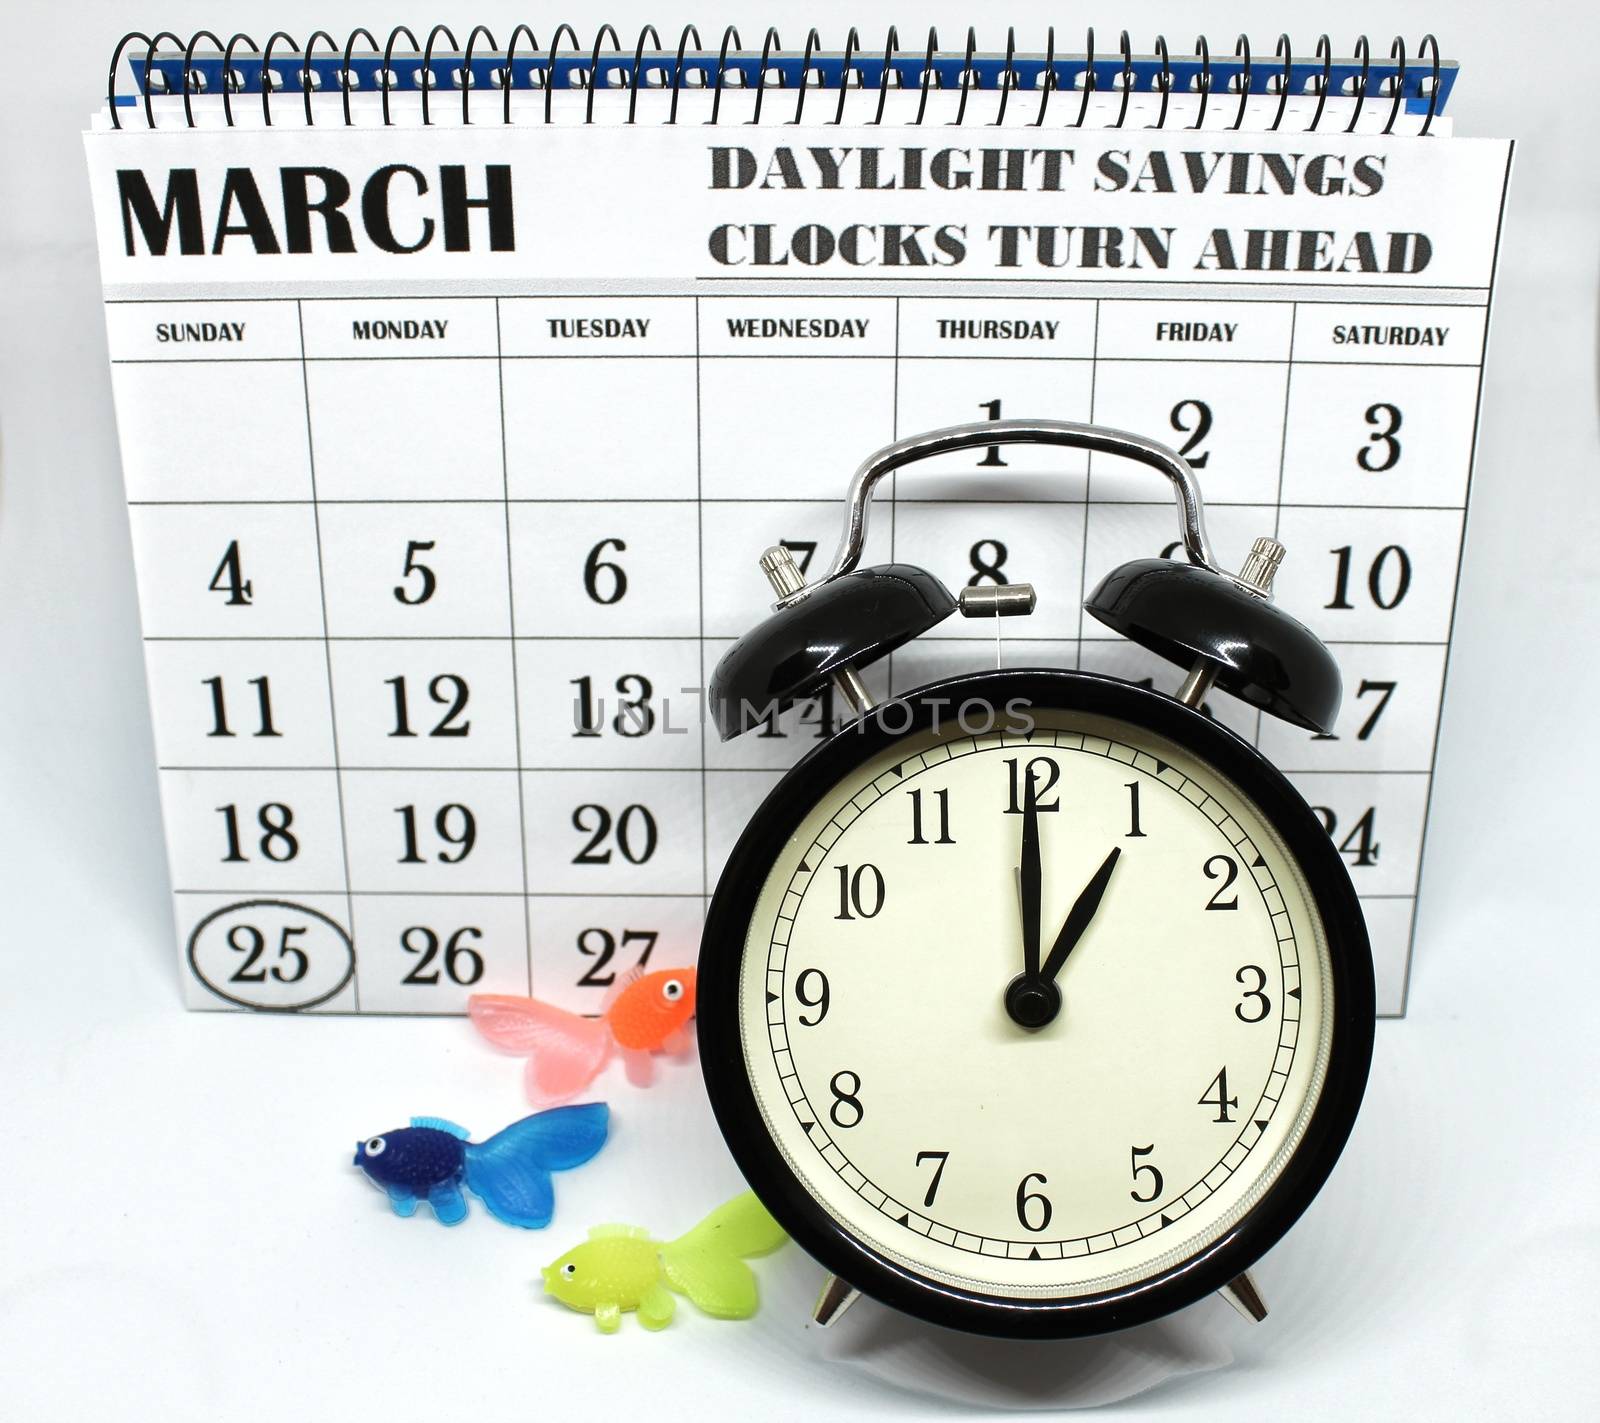 Daylight Savings Spring Forward sunday at 1:00 a.m. March 25 date indicated in the calendar. Clock next to colorful fish.